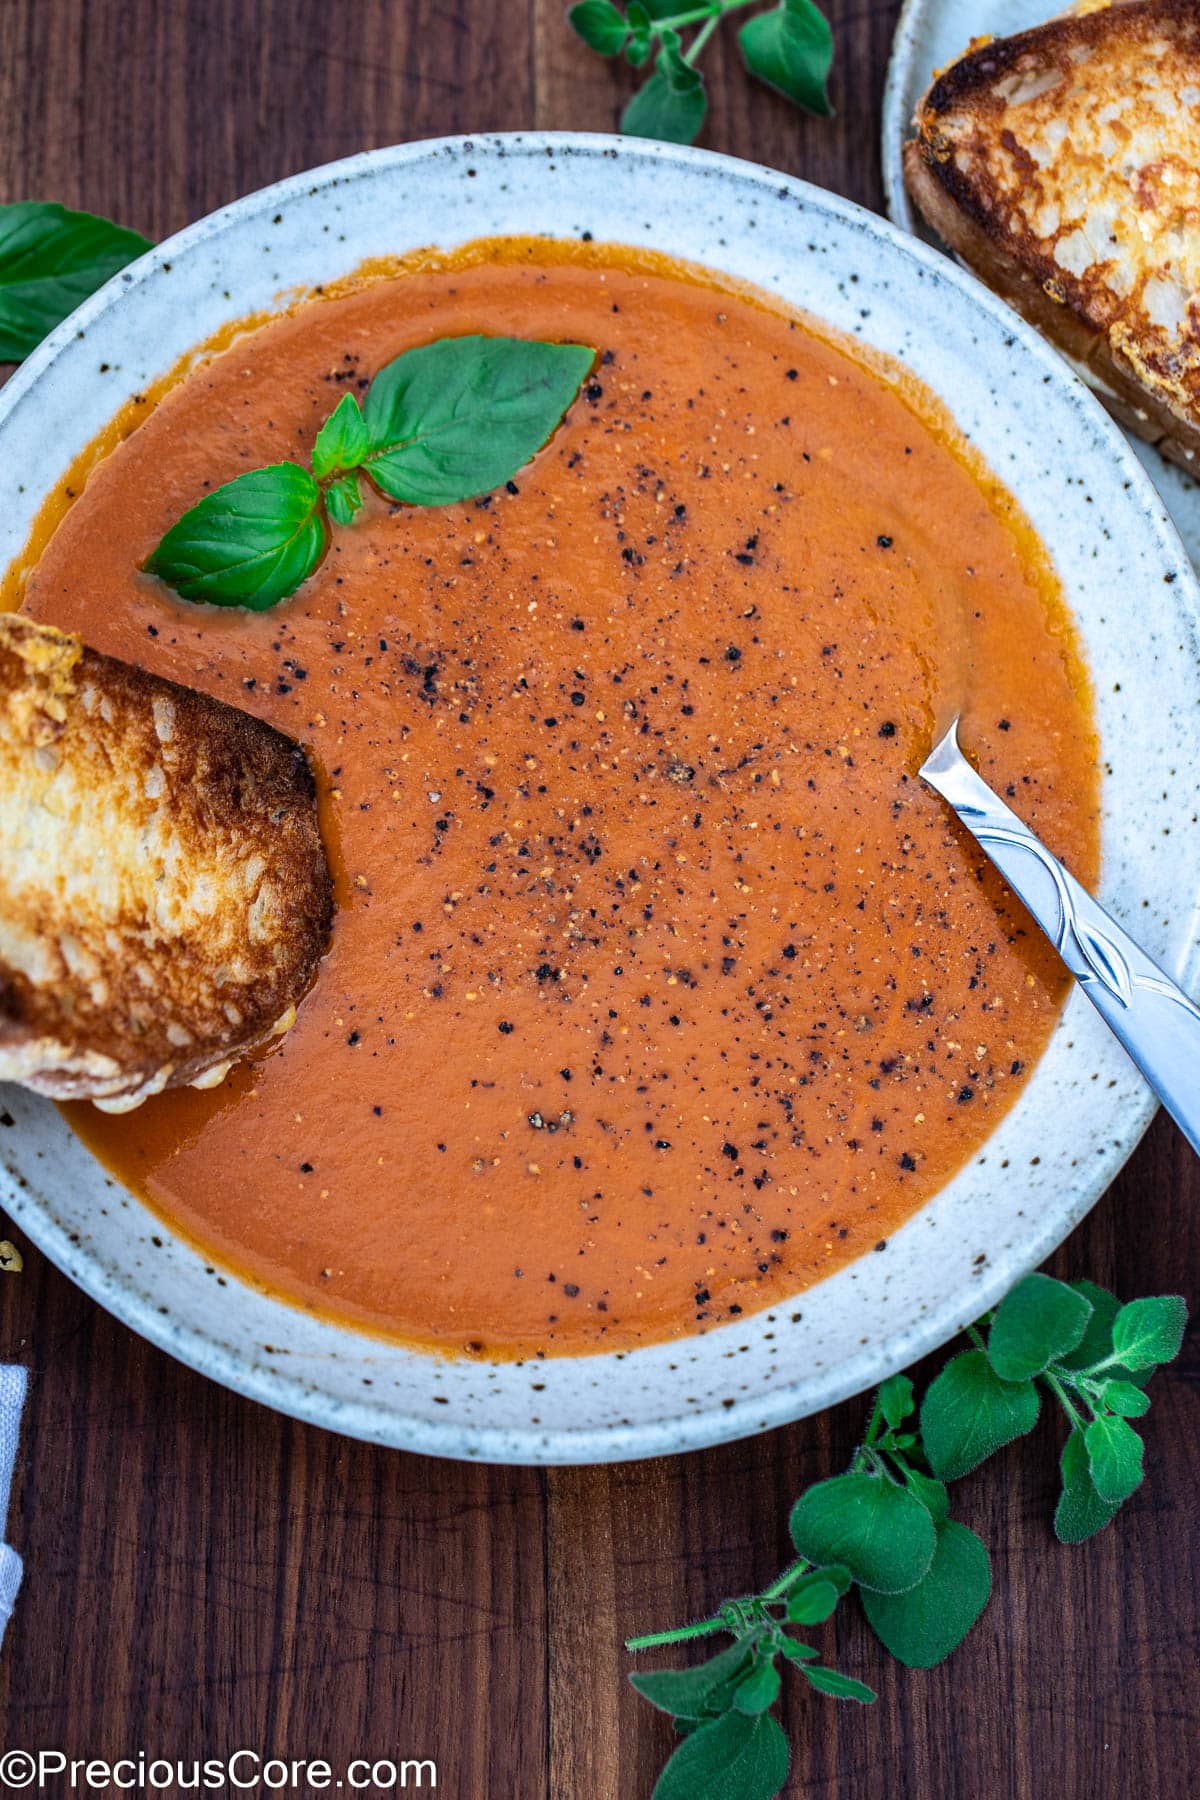 Roasted tomato and garlic soup in a bowl with a grilled cheese sandwich dipping into the soup.